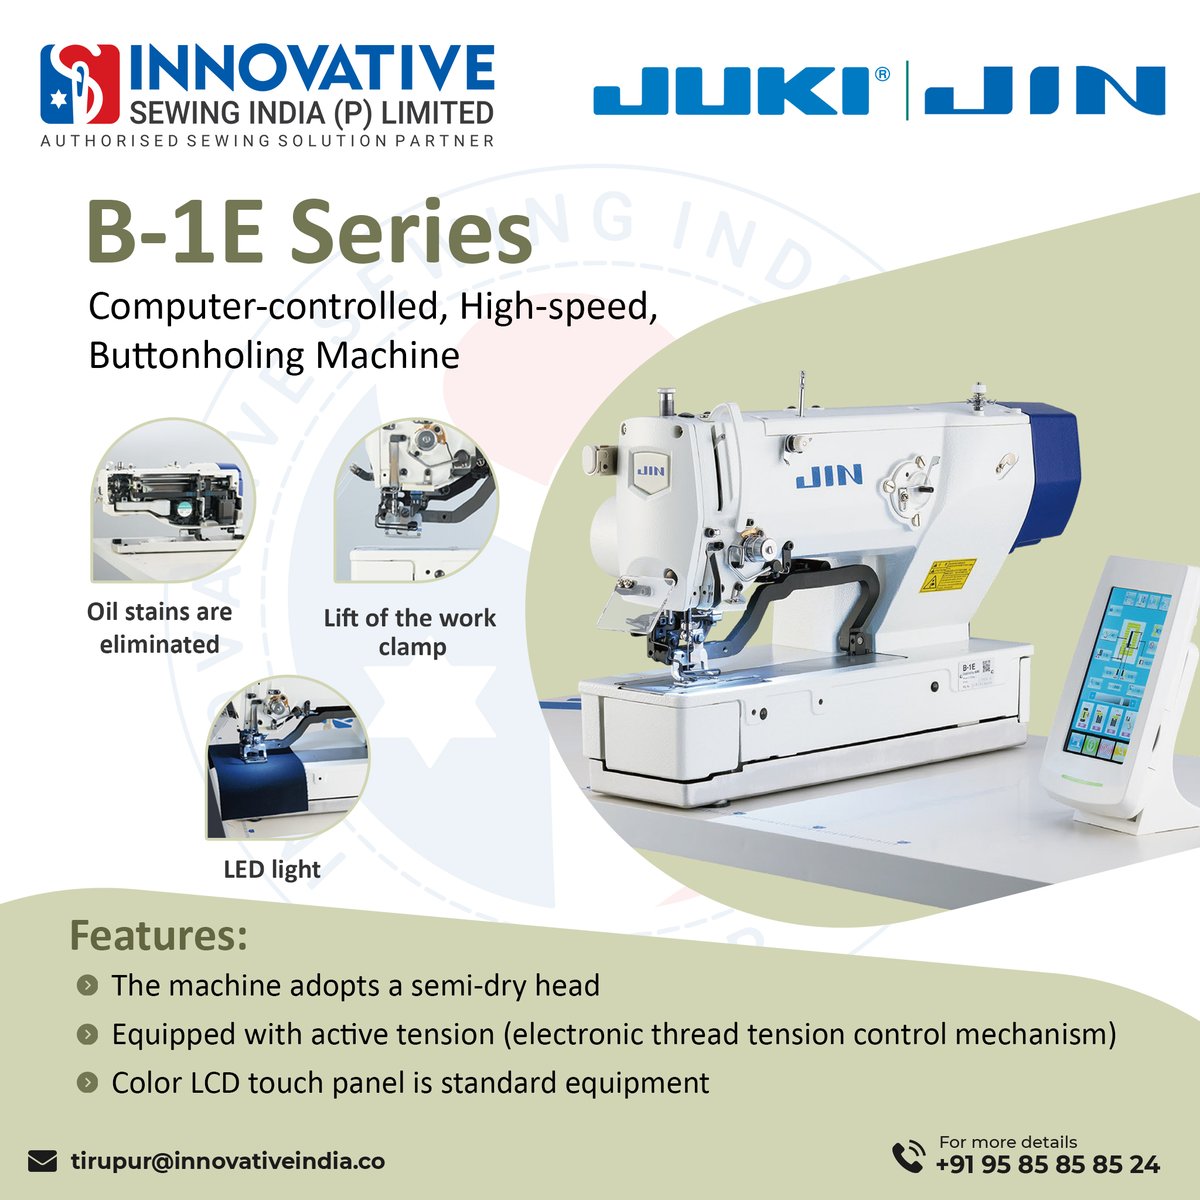 Introducing our B-1E Series: a computer-controlled, high-speed buttonholing machine! 

For More Details
📞 +91 95 85 85 85 24
📧 tirupur@innovativeindia.co

#B1ESeries #SewingInnovation #CraftingMagic #CreativeStitching #SewingGoals #Innovative #speedsewing #sewing #sewingmachine